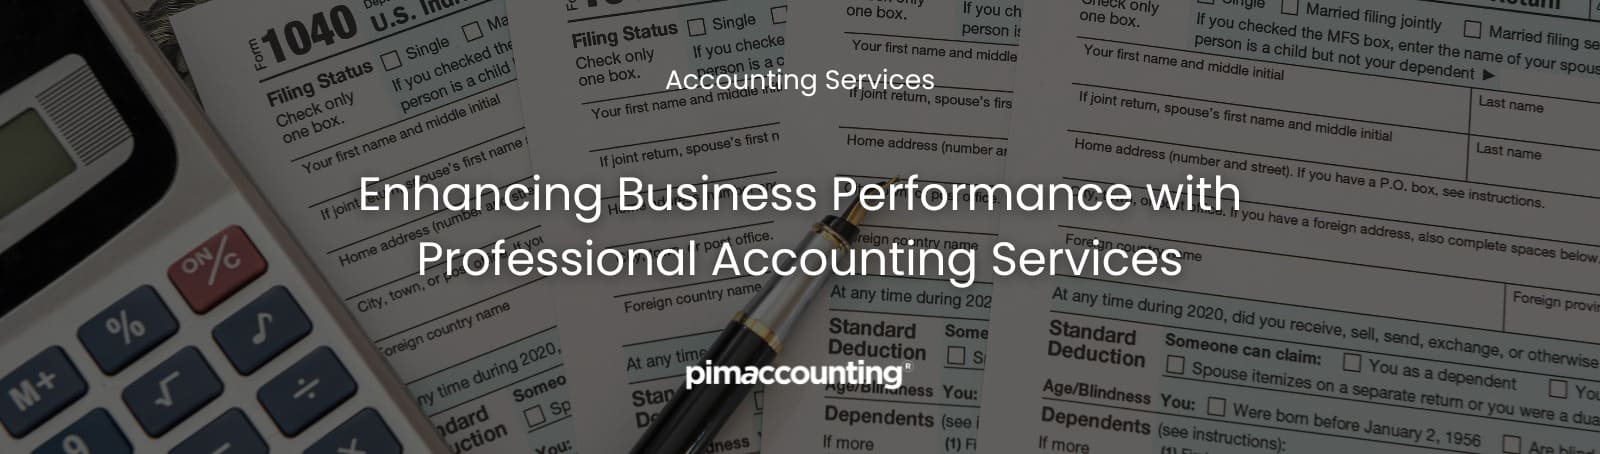 Enhancing Business Performance with Professional Accounting Services